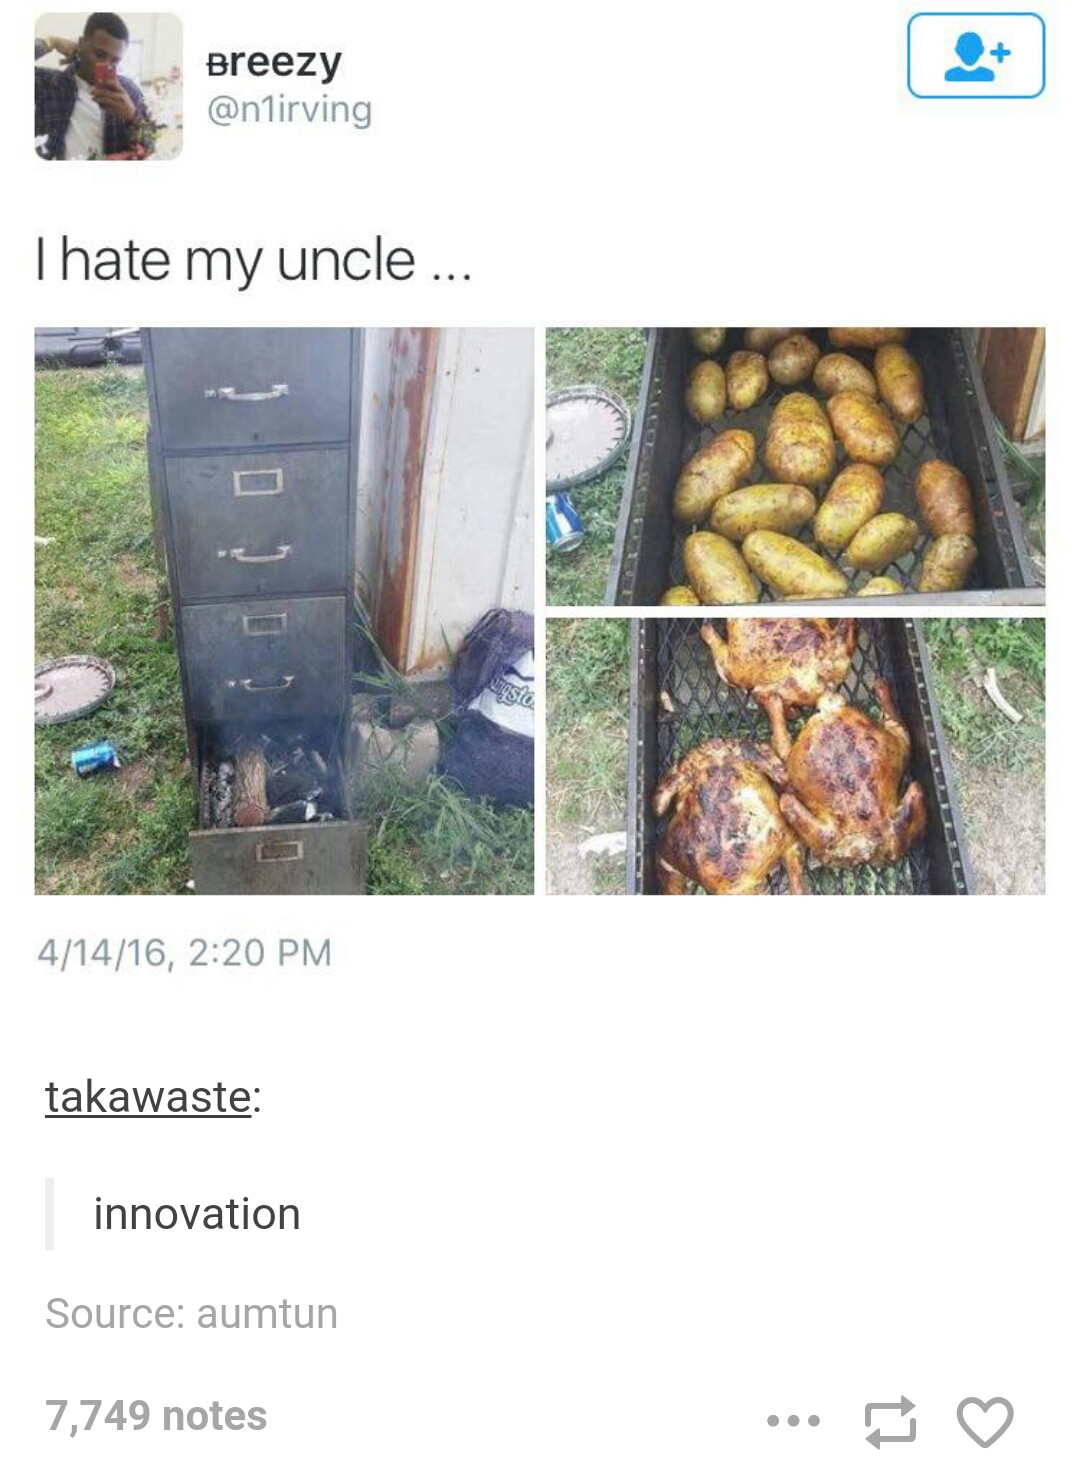 Breezy Thate my uncle... 41416, takawaste innovation Source aumtun 7,749 notes